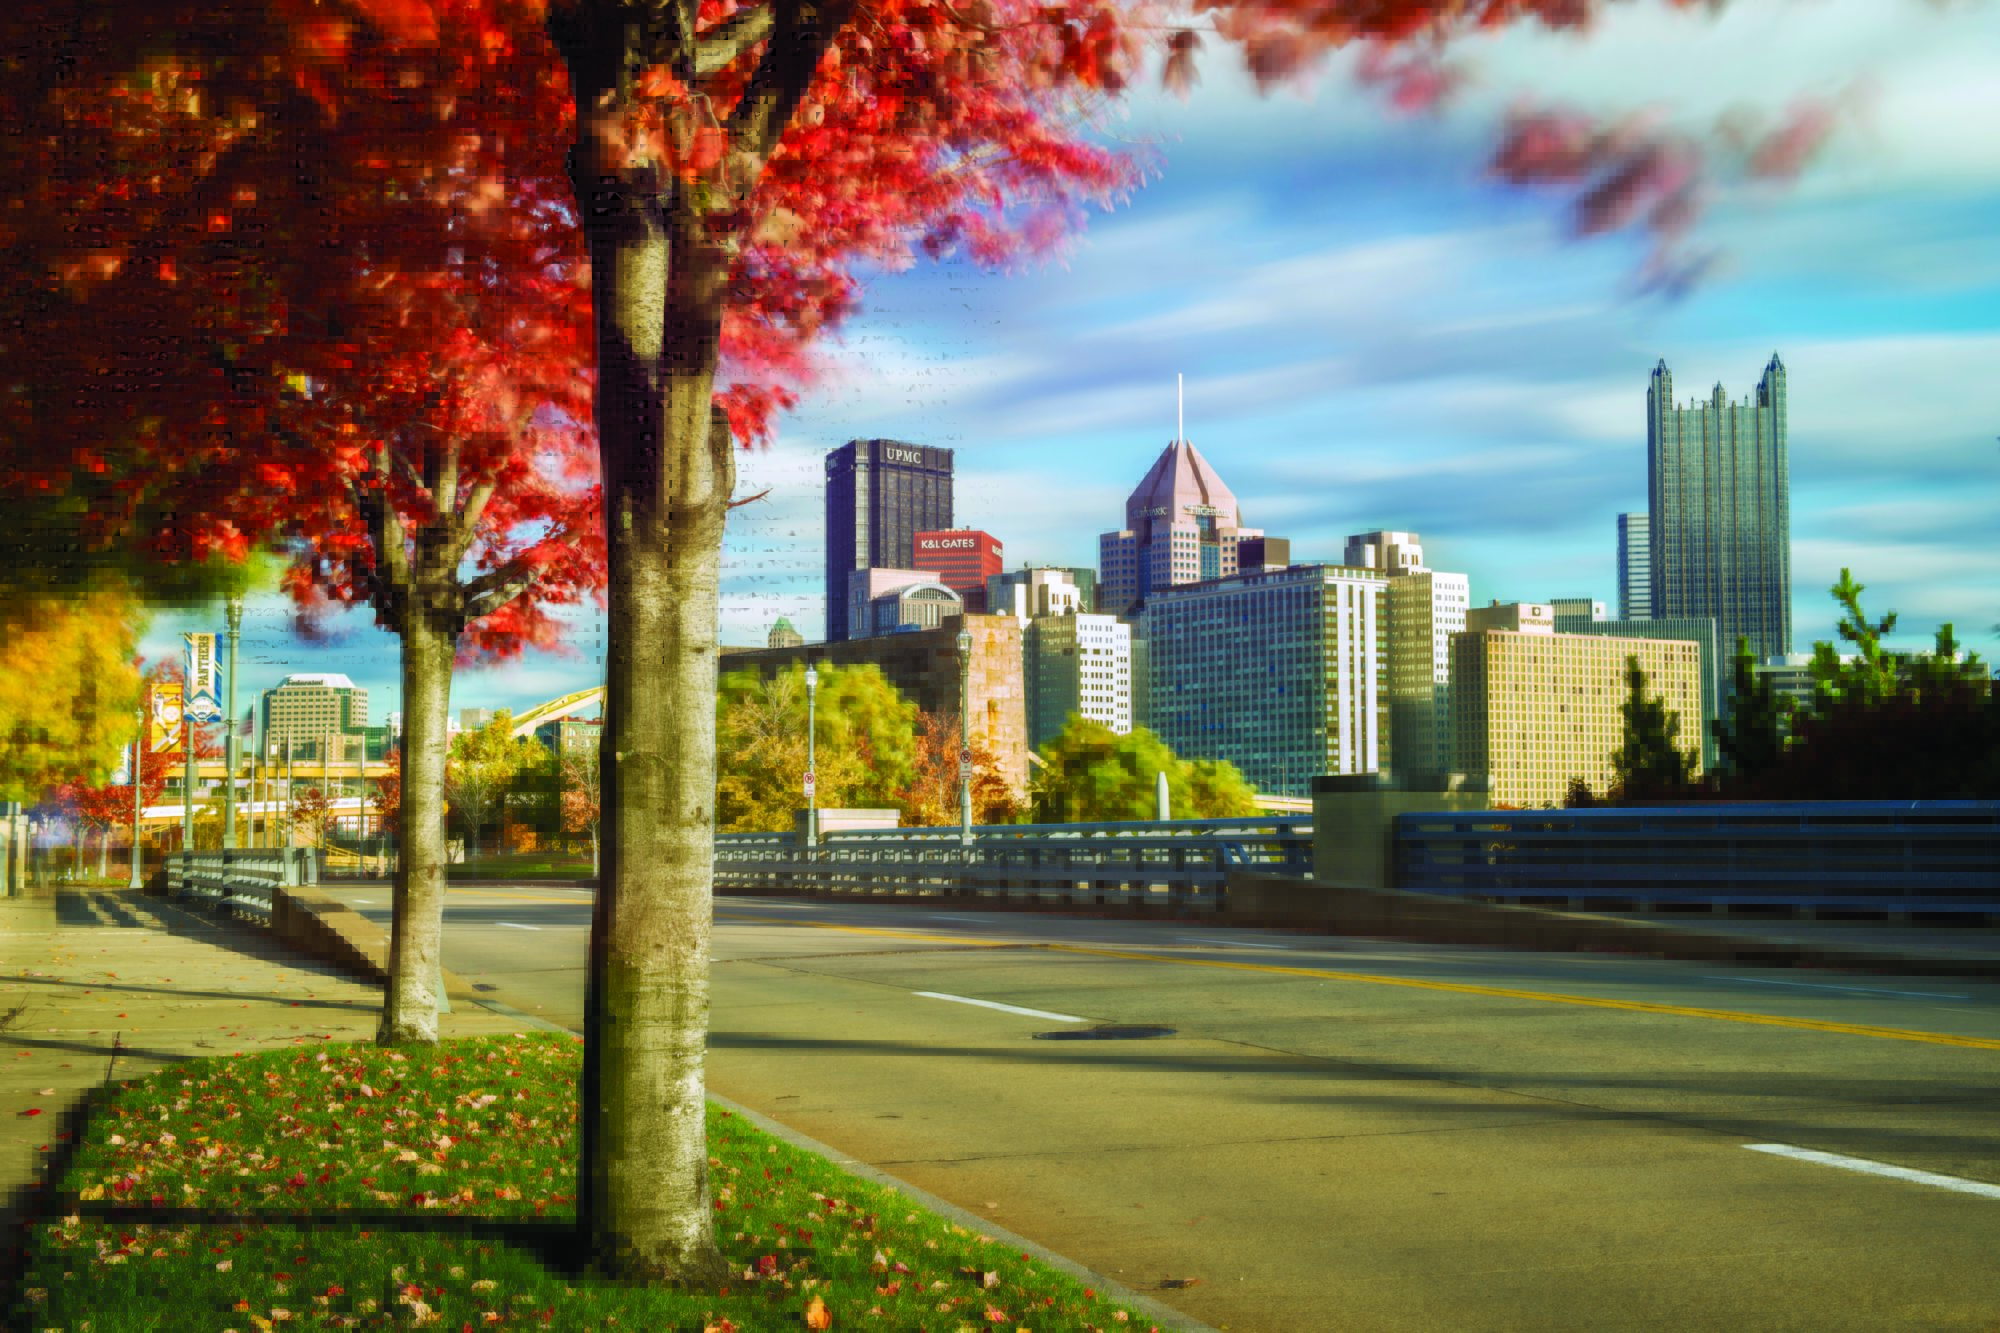 A view of Pittsburgh in the fall season